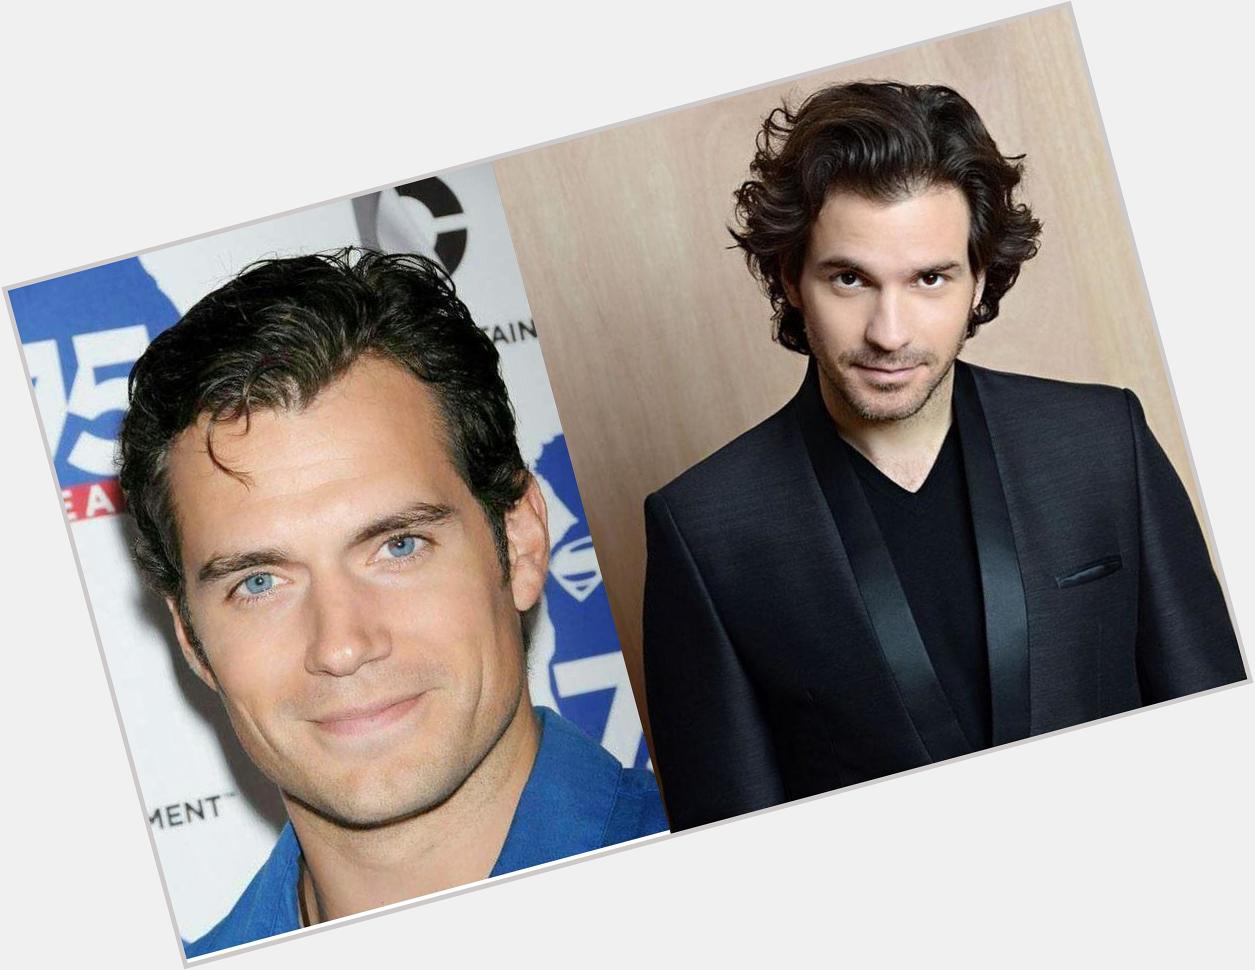 Wishing a very Happy Birthday to Henry Cavill and Santiago Cabrera.  Please 